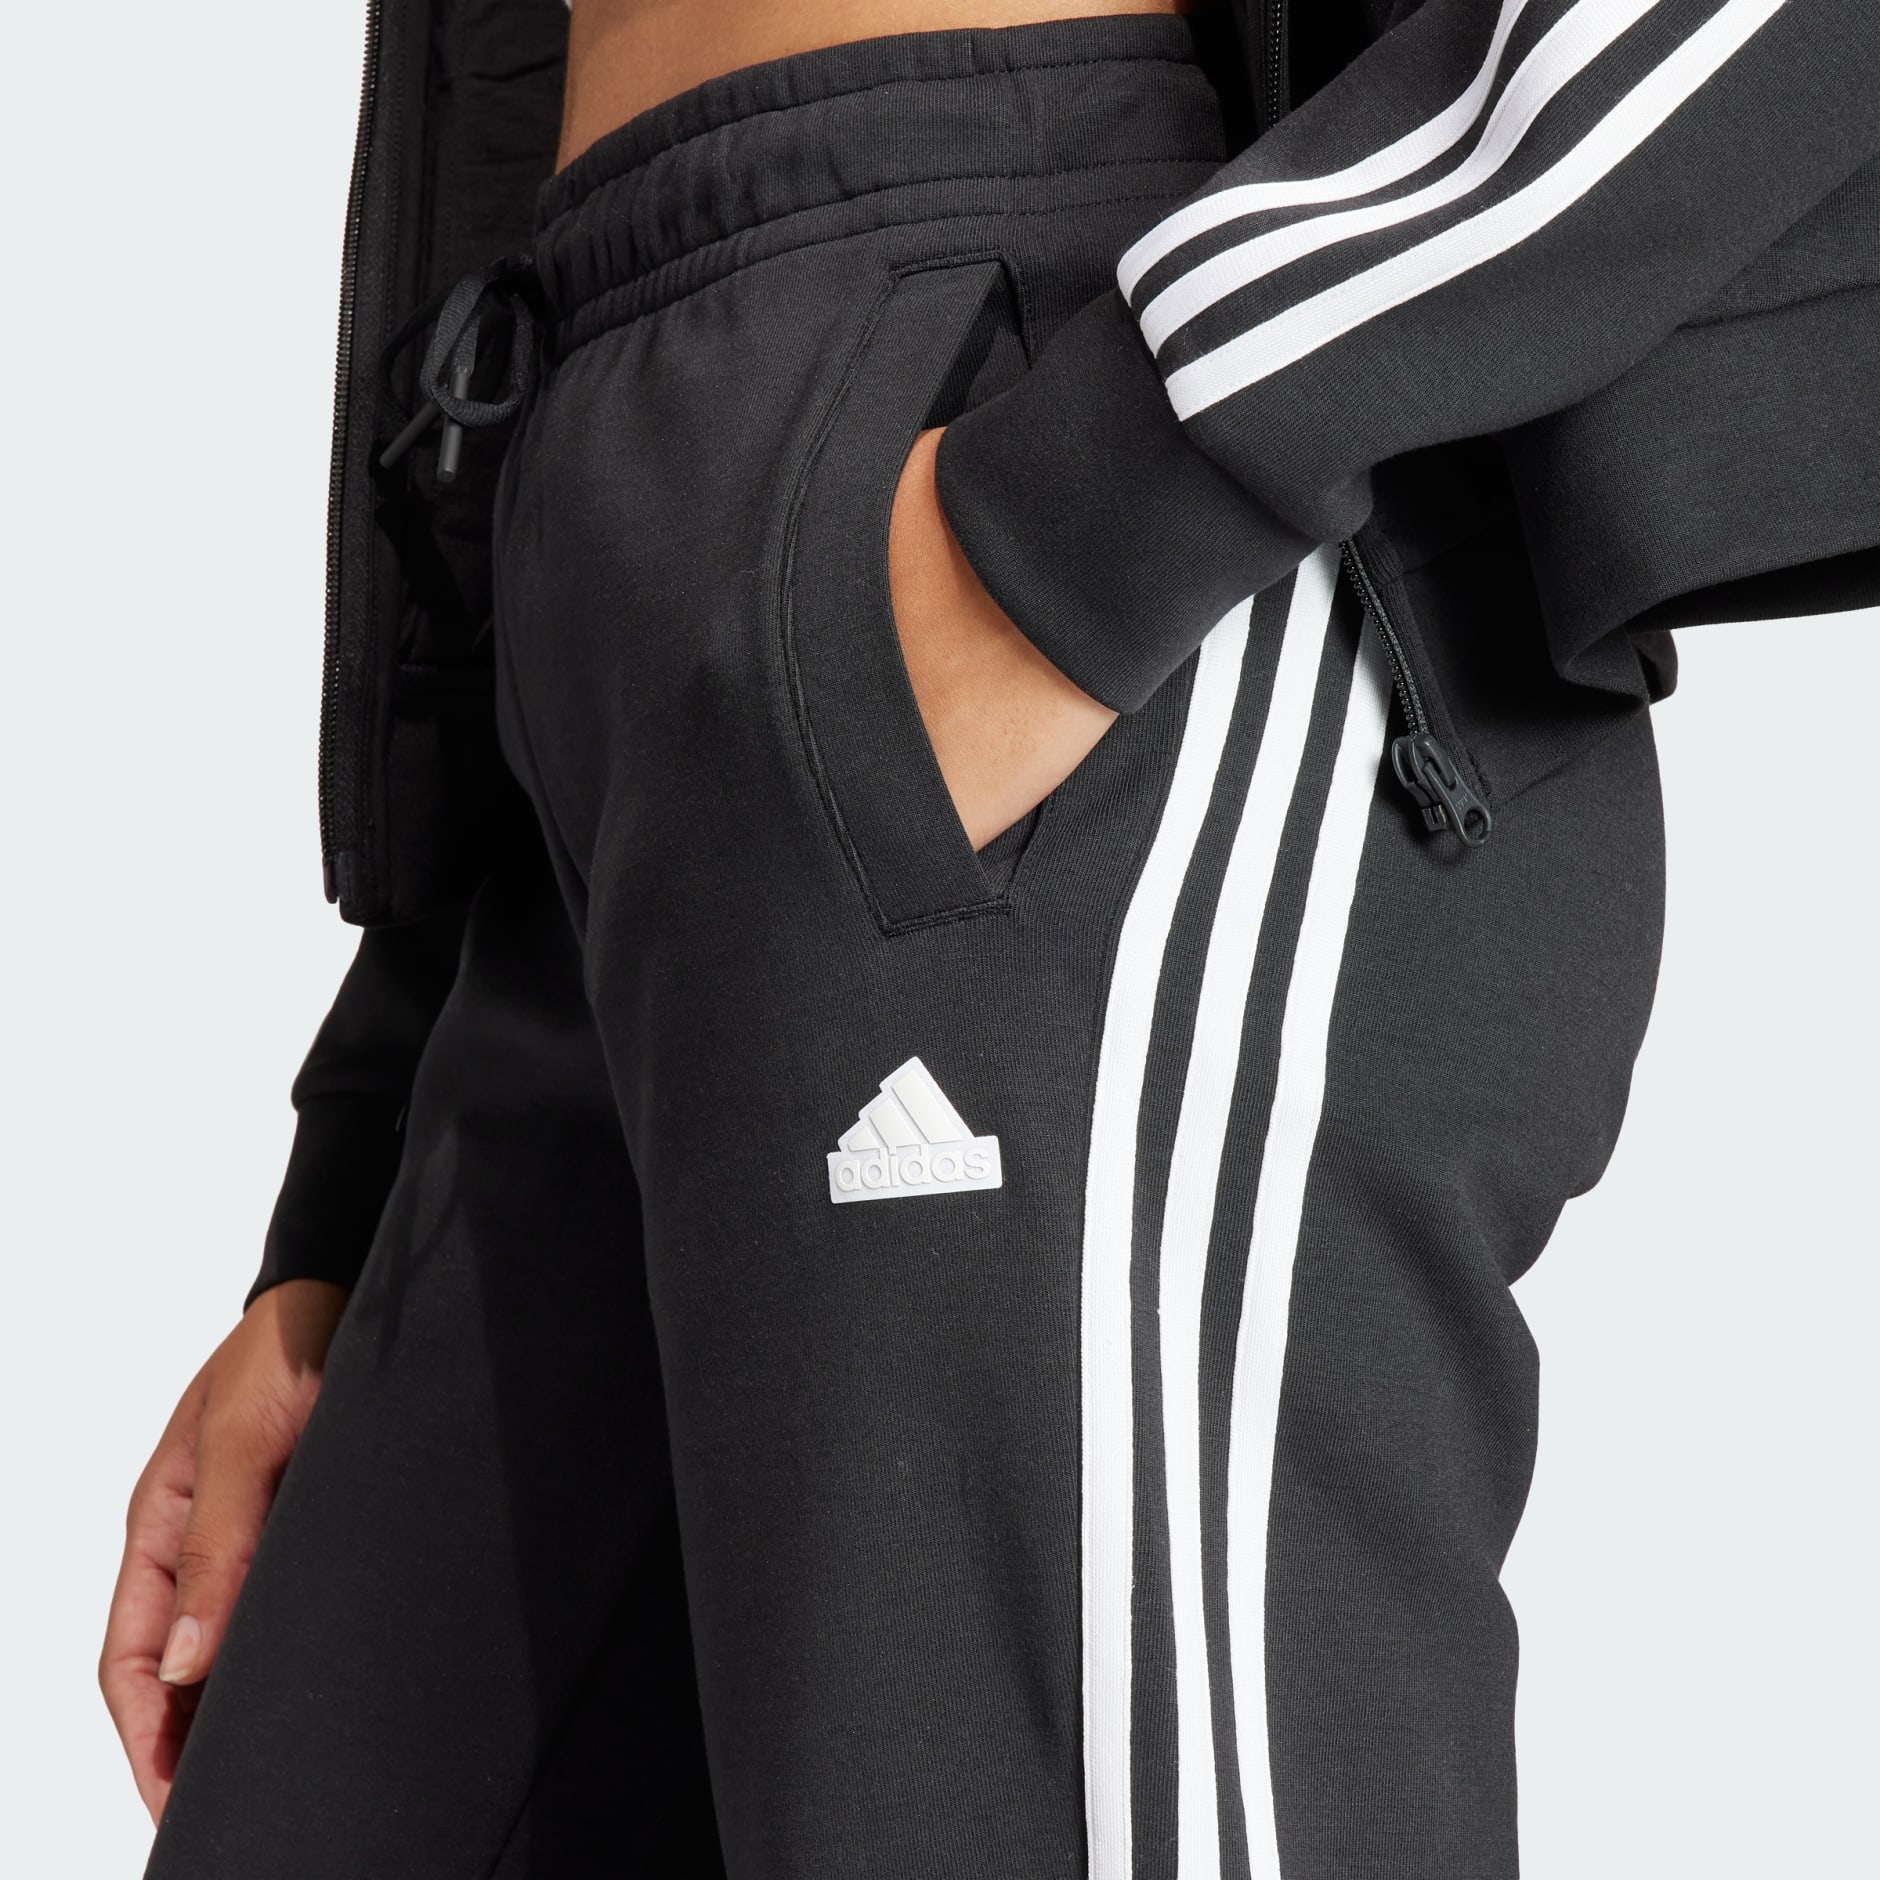 Future icons 3-stripes joggers in cotton mix, black, Adidas